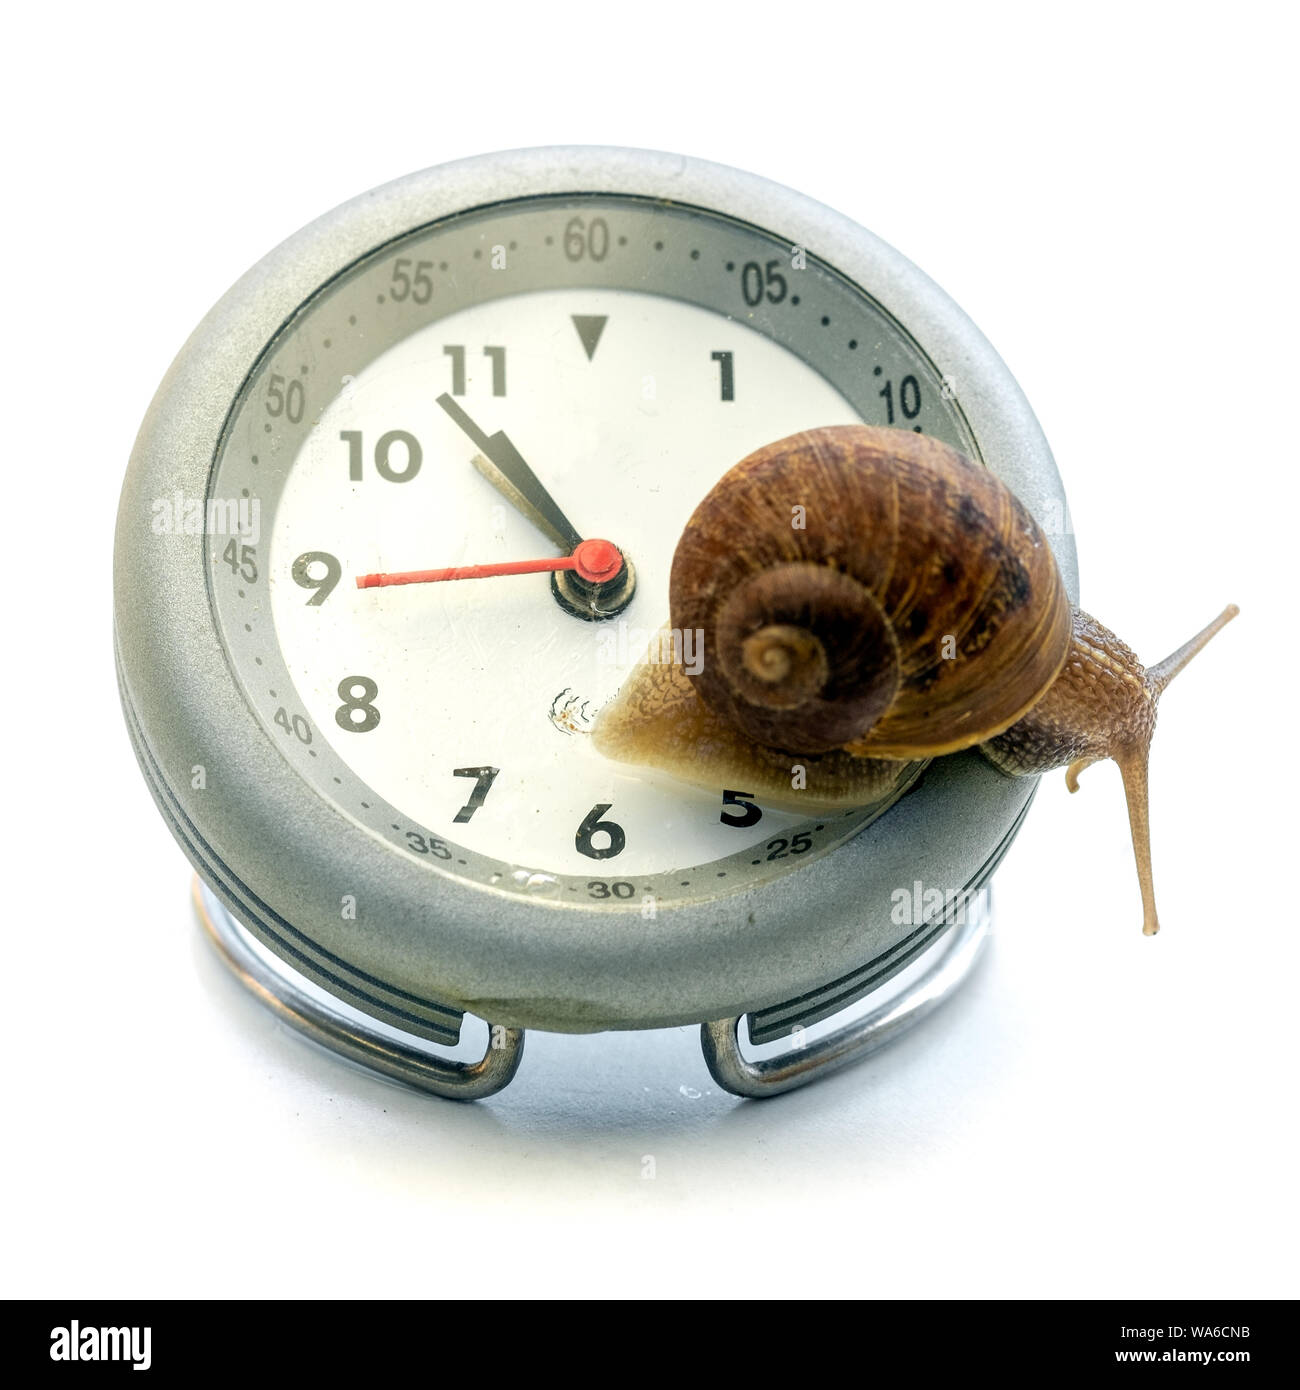 Clock and snail time concept. The snail slide out of the clock. Stock Photo